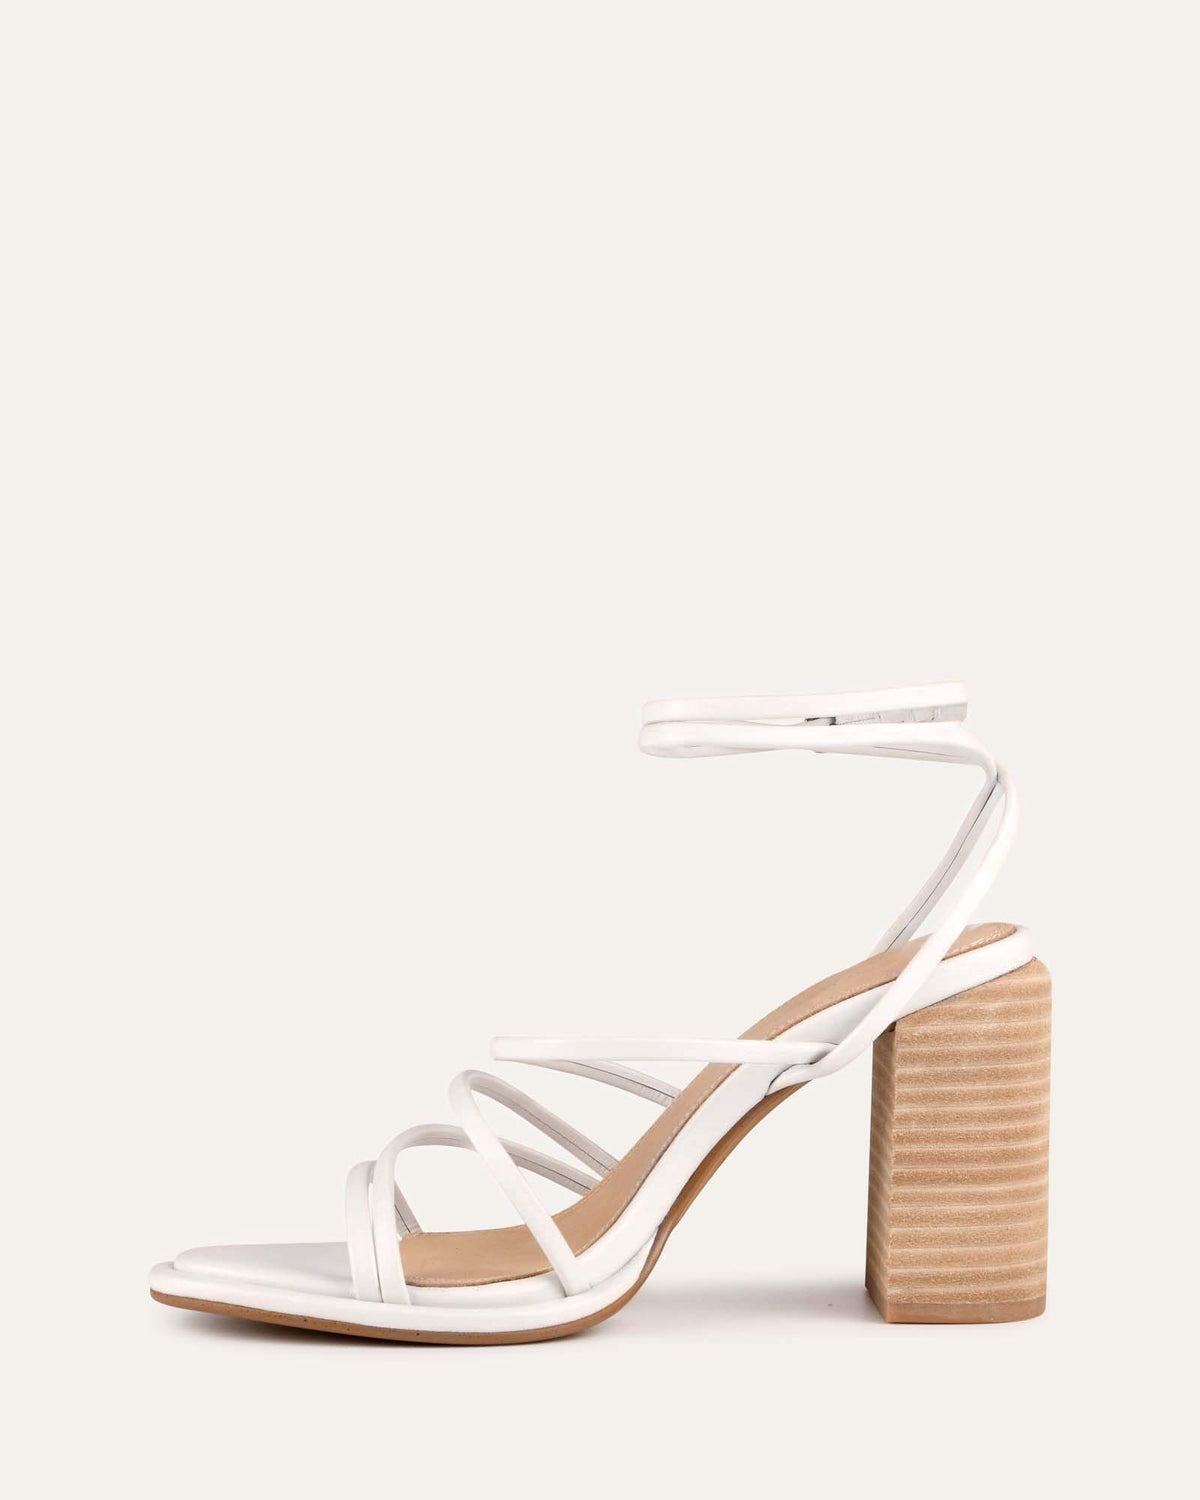 PIP HIGH HEEL SANDALS WHITE LEATHER